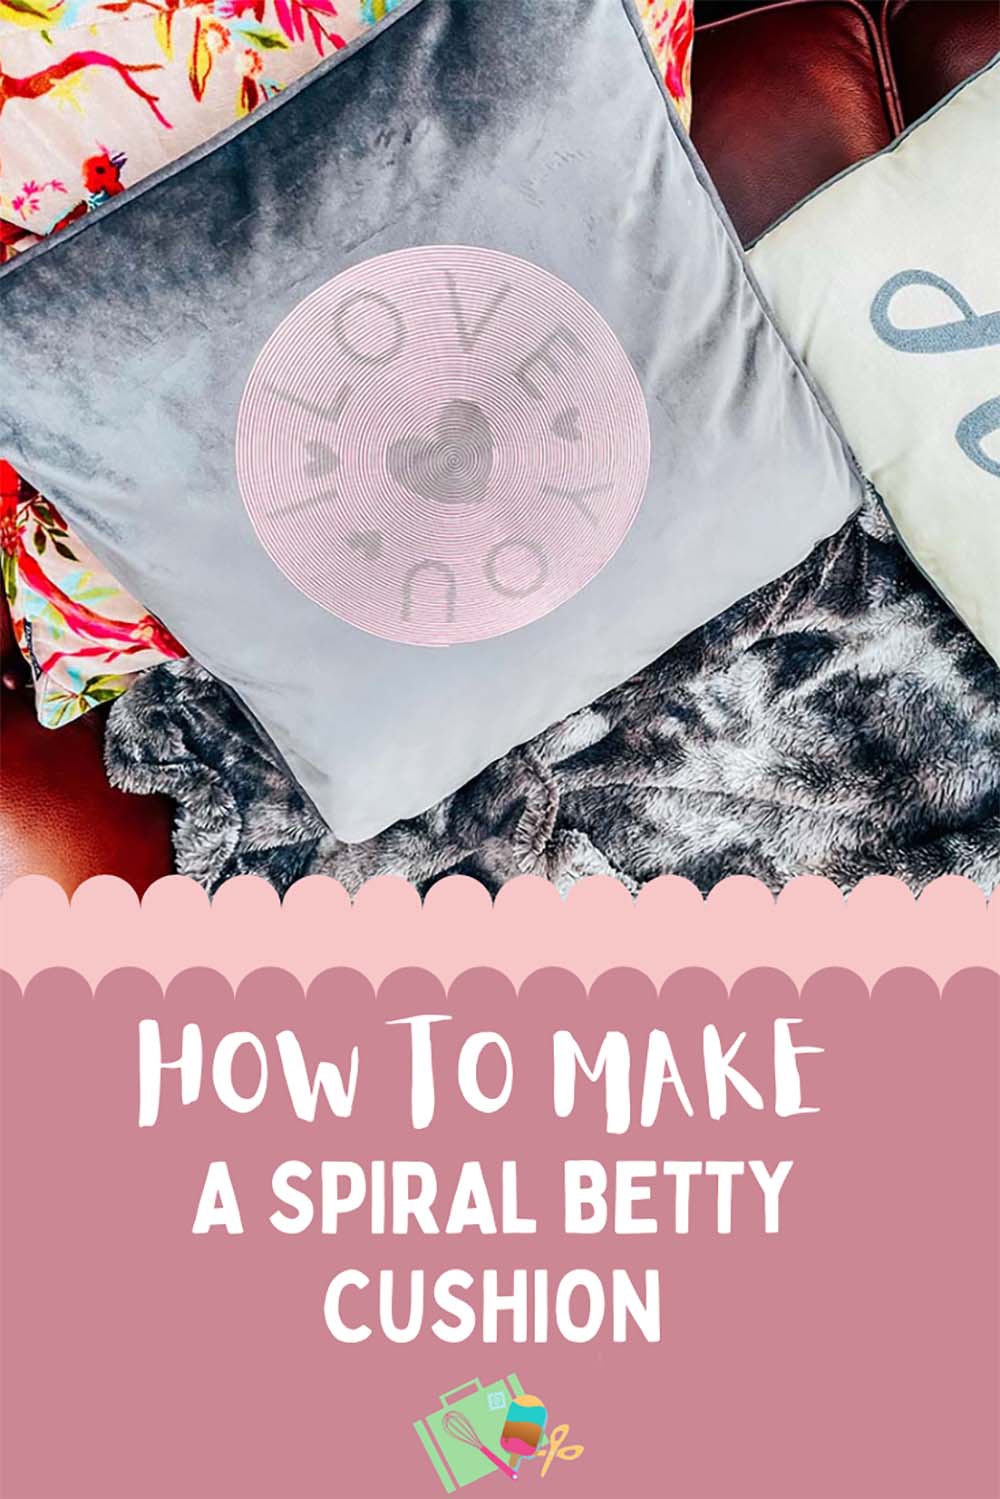 How to make a spiral Betty cushion